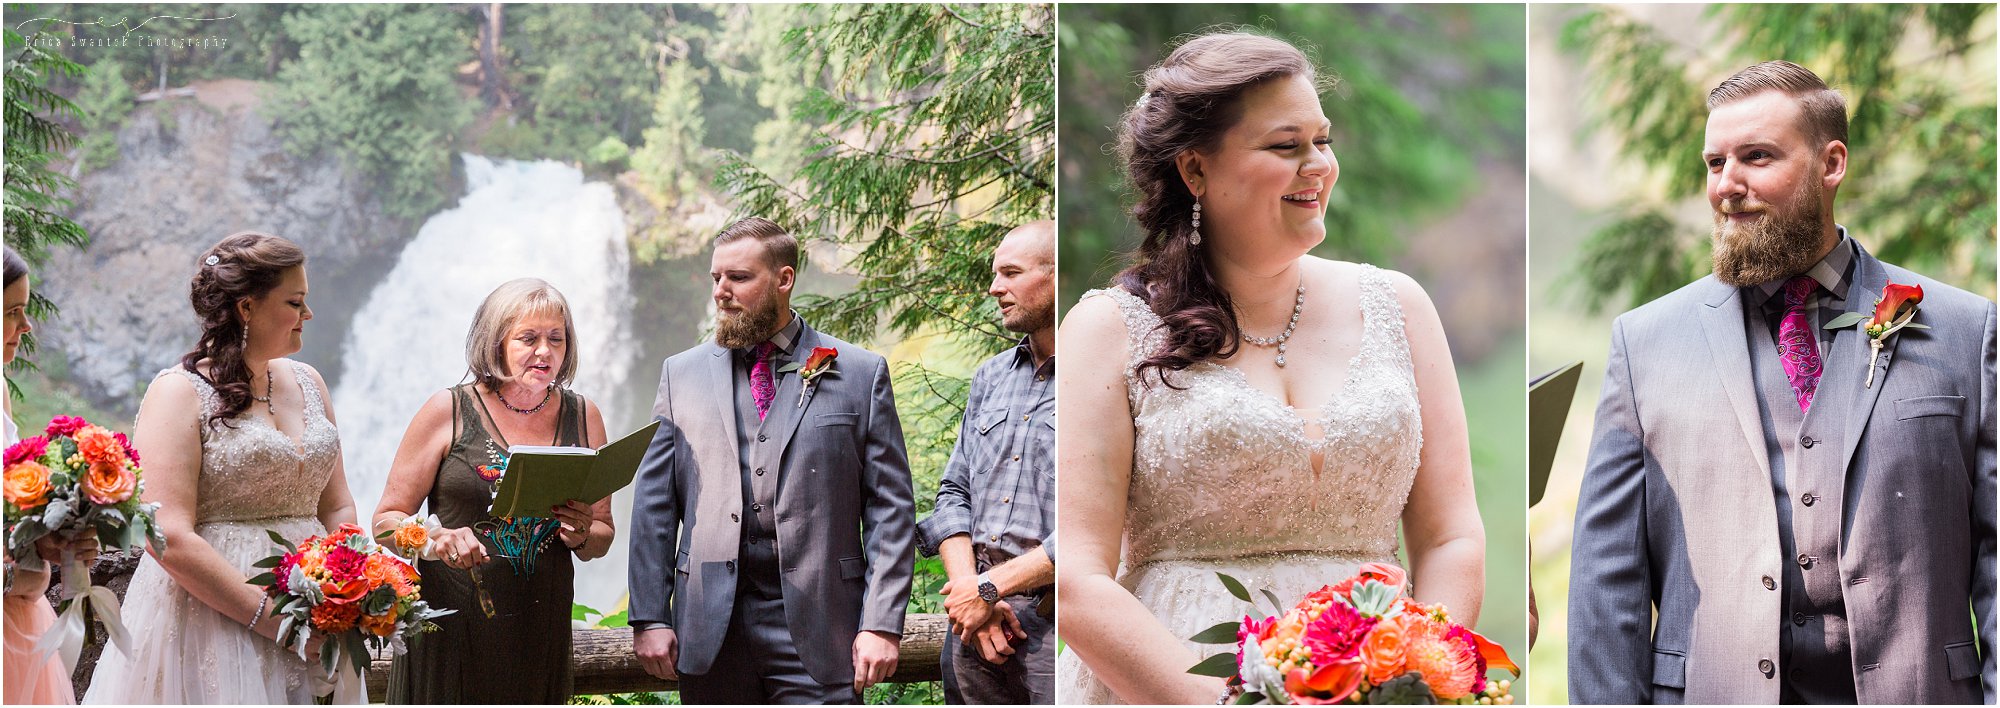 A very intimate wedding ceremony in front of Sahalie Falls in Oregon. | Erica Swantek Photography